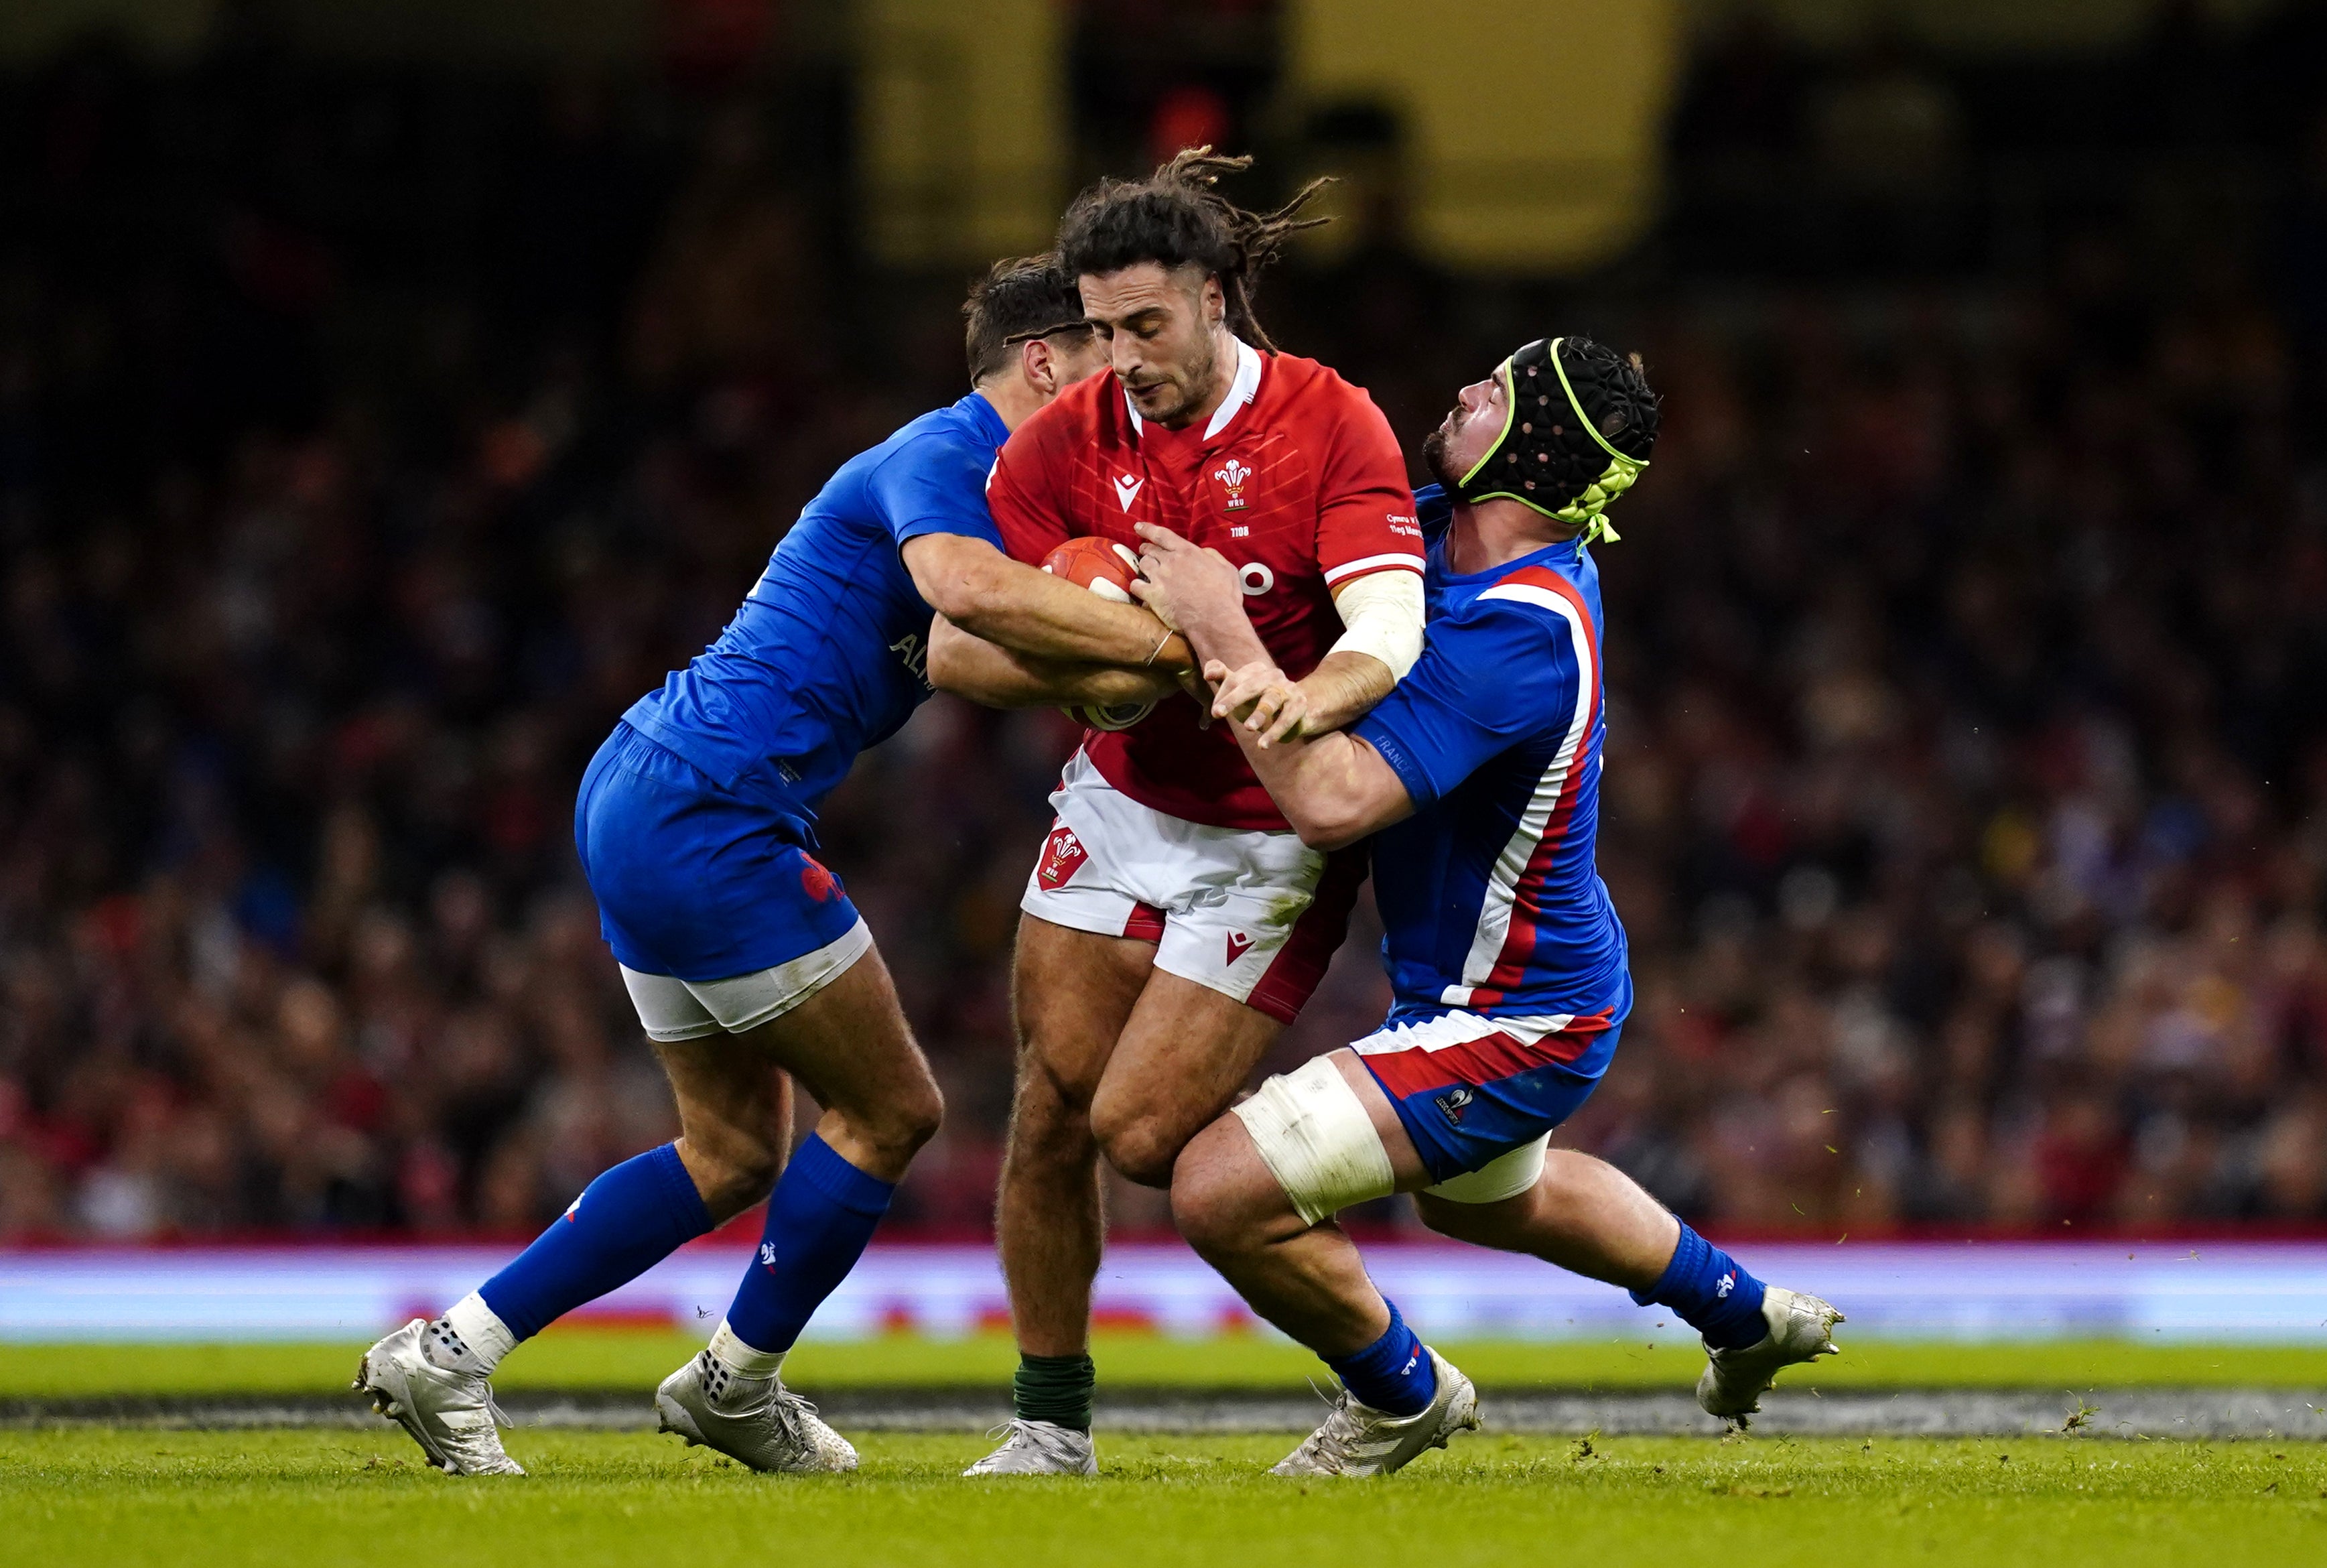 Wales’ Josh Navidi has made an immediate impression on his return to Test rugby